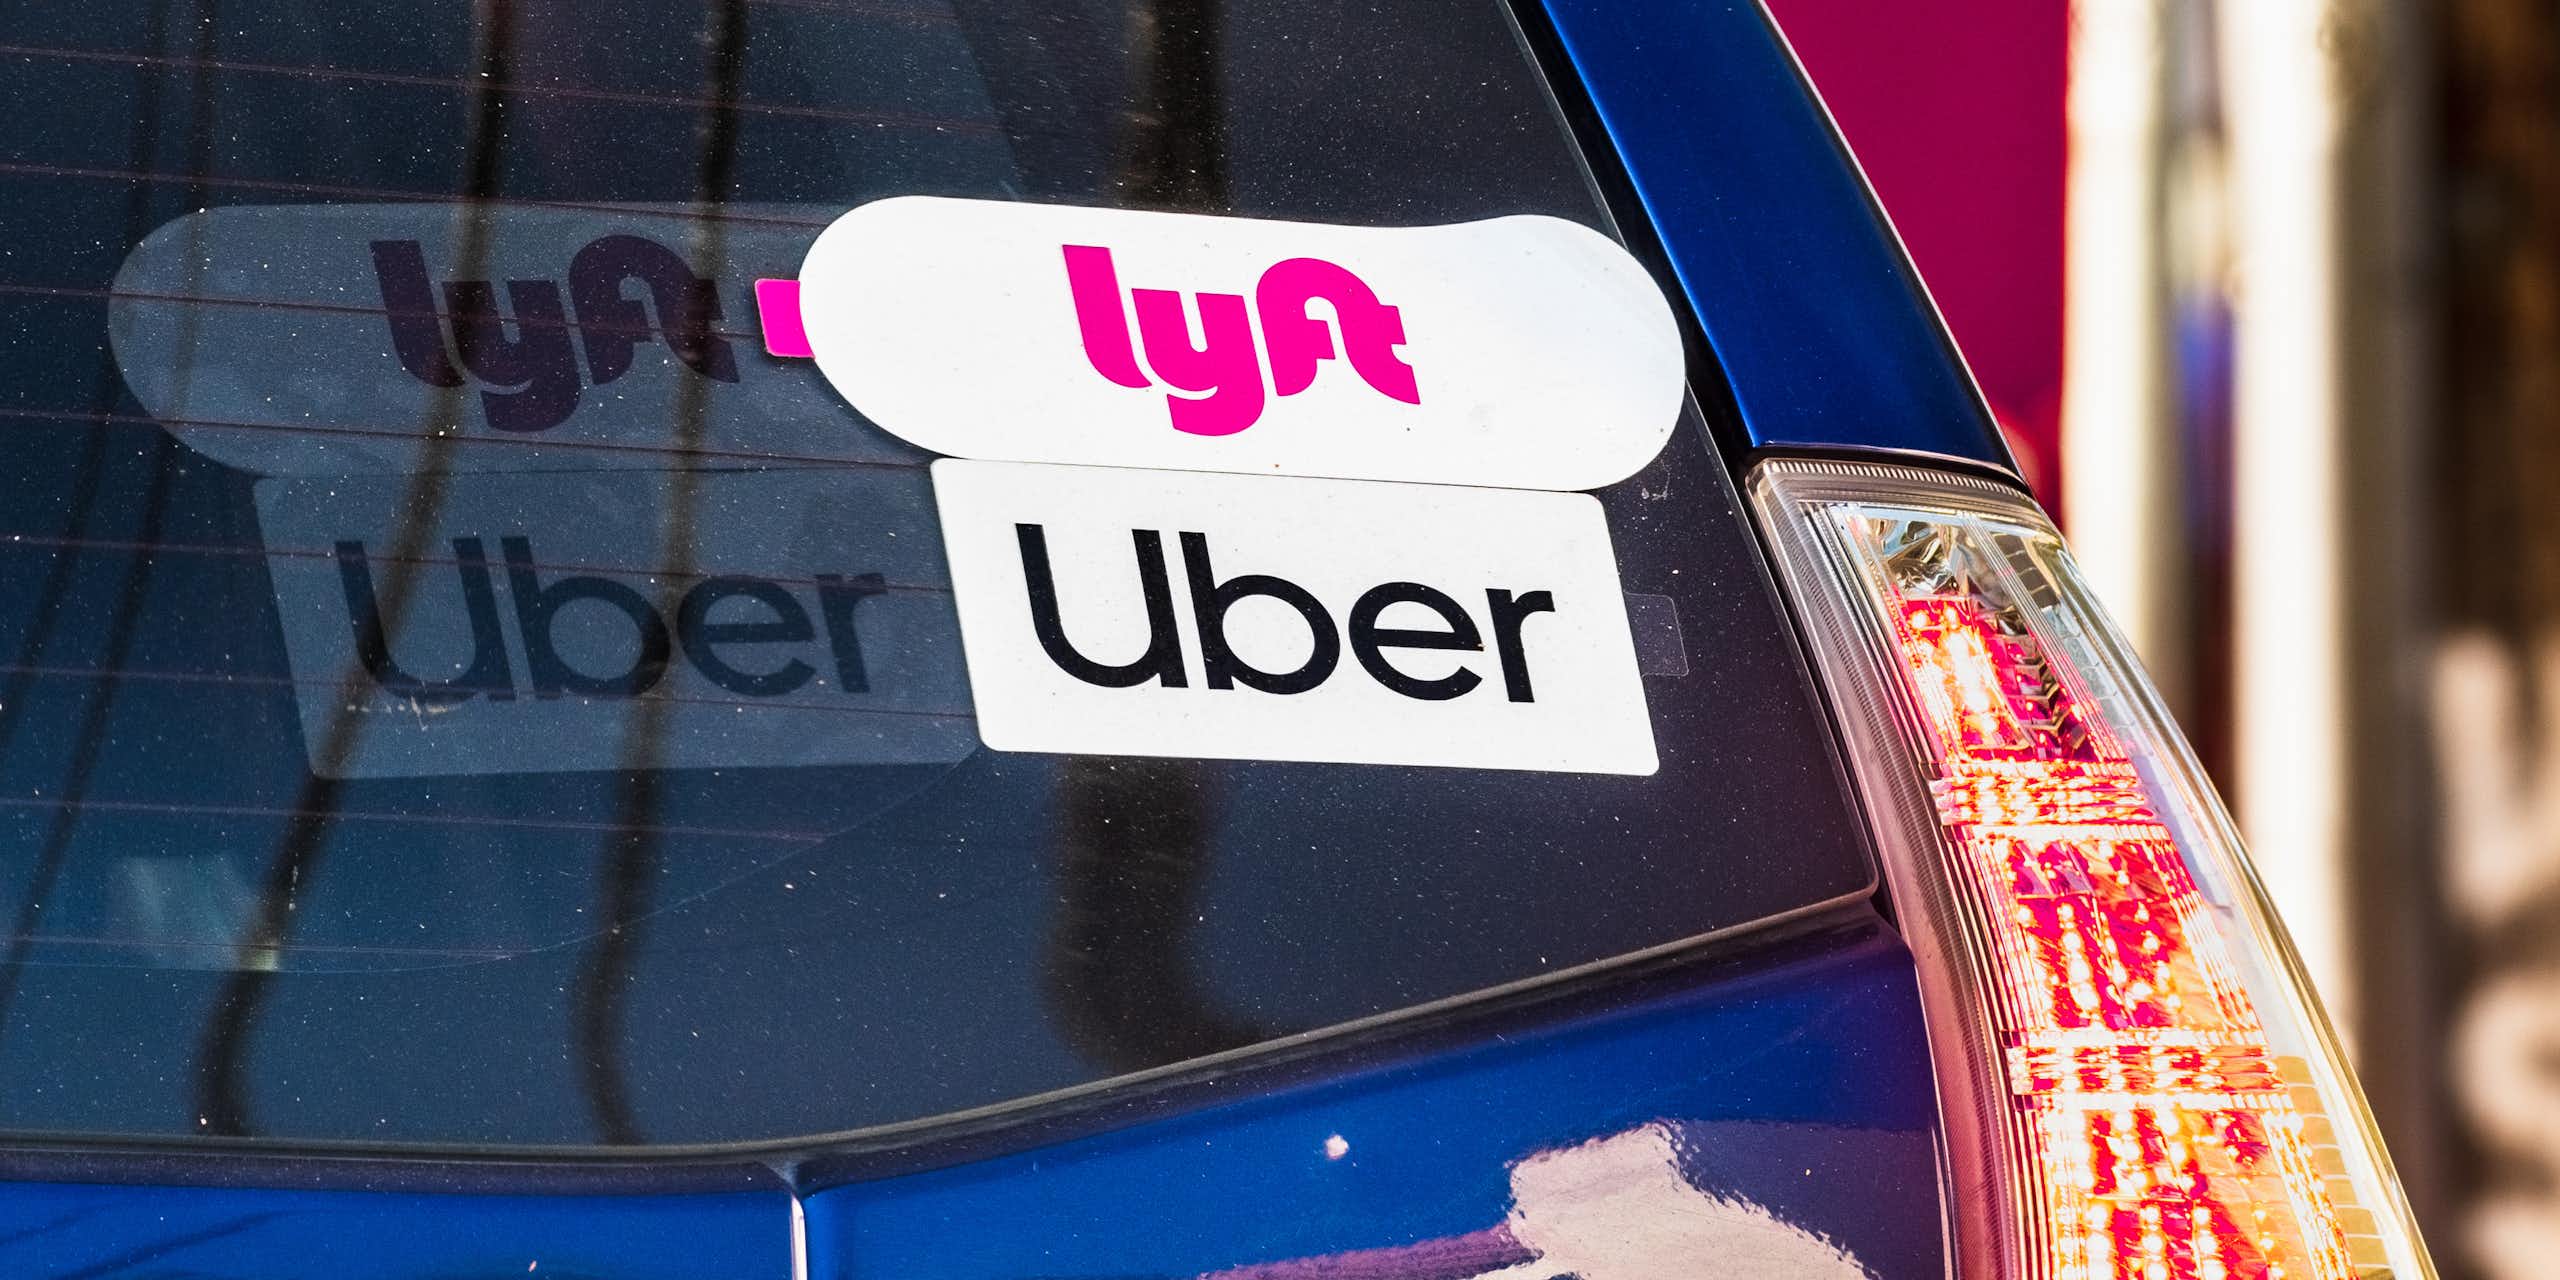 the back window of a car showing Uber and Lyft stickers